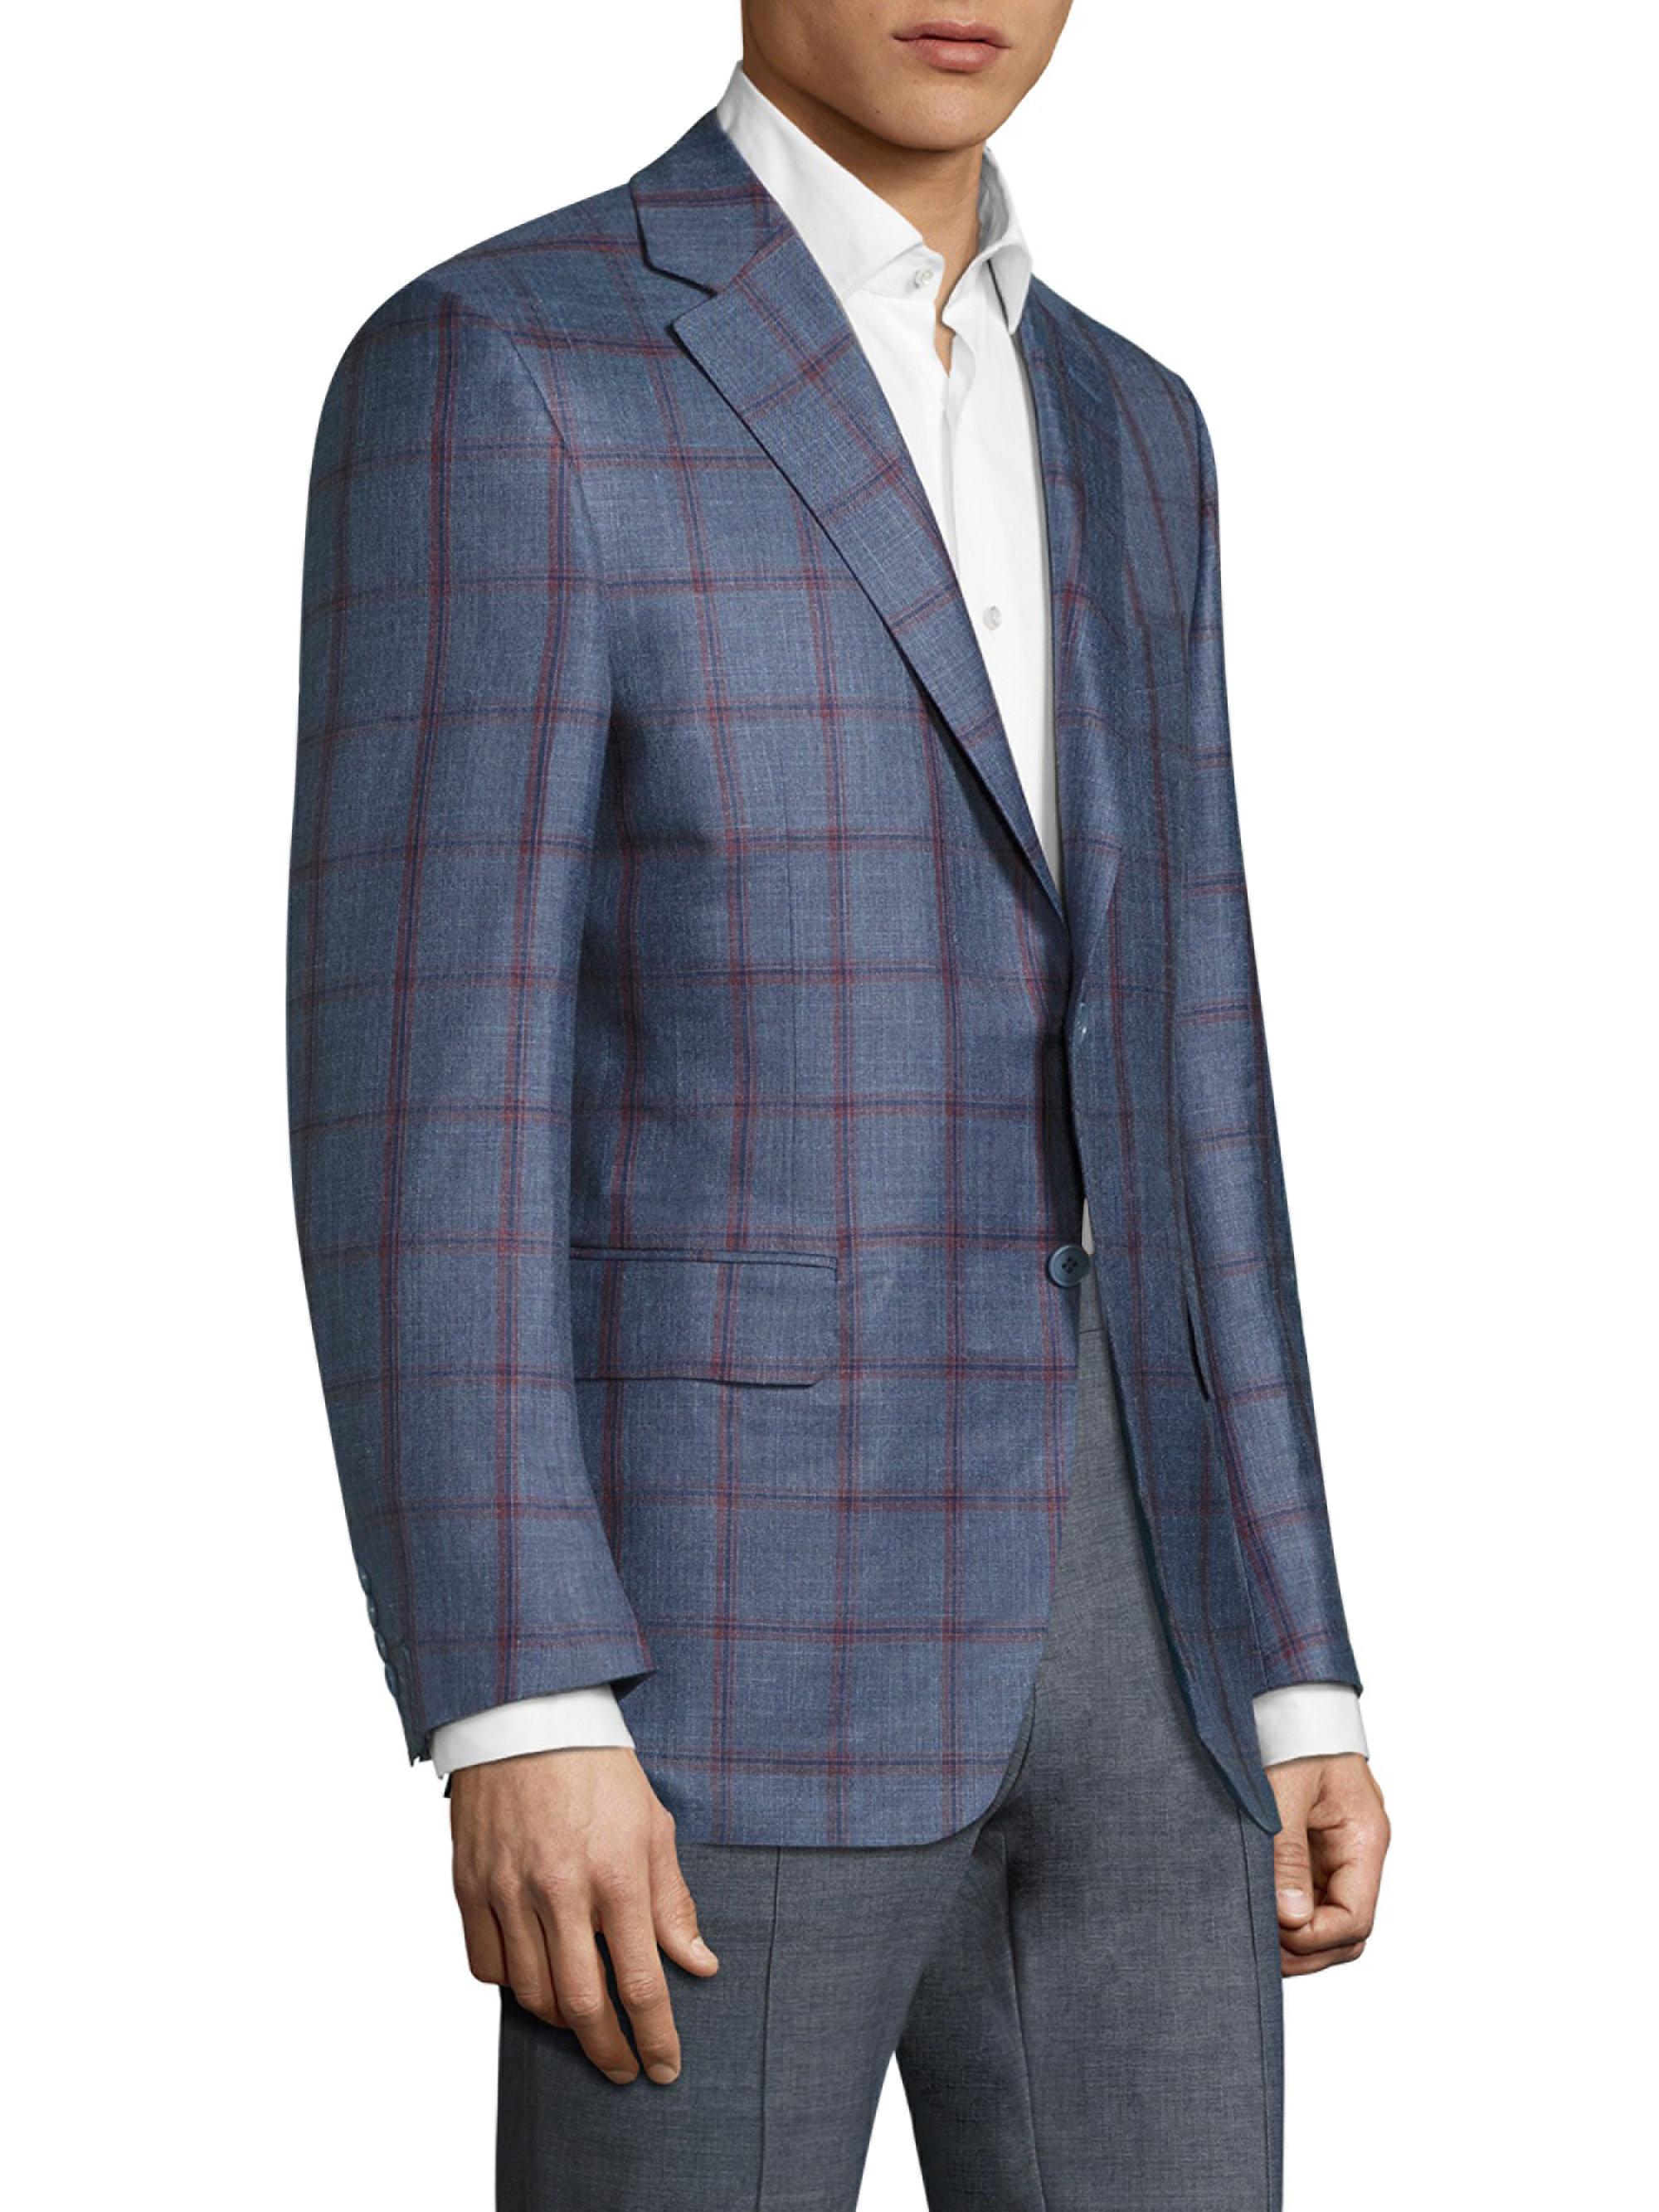 Canali Checked Wool Jacket in Blue for Men - Lyst